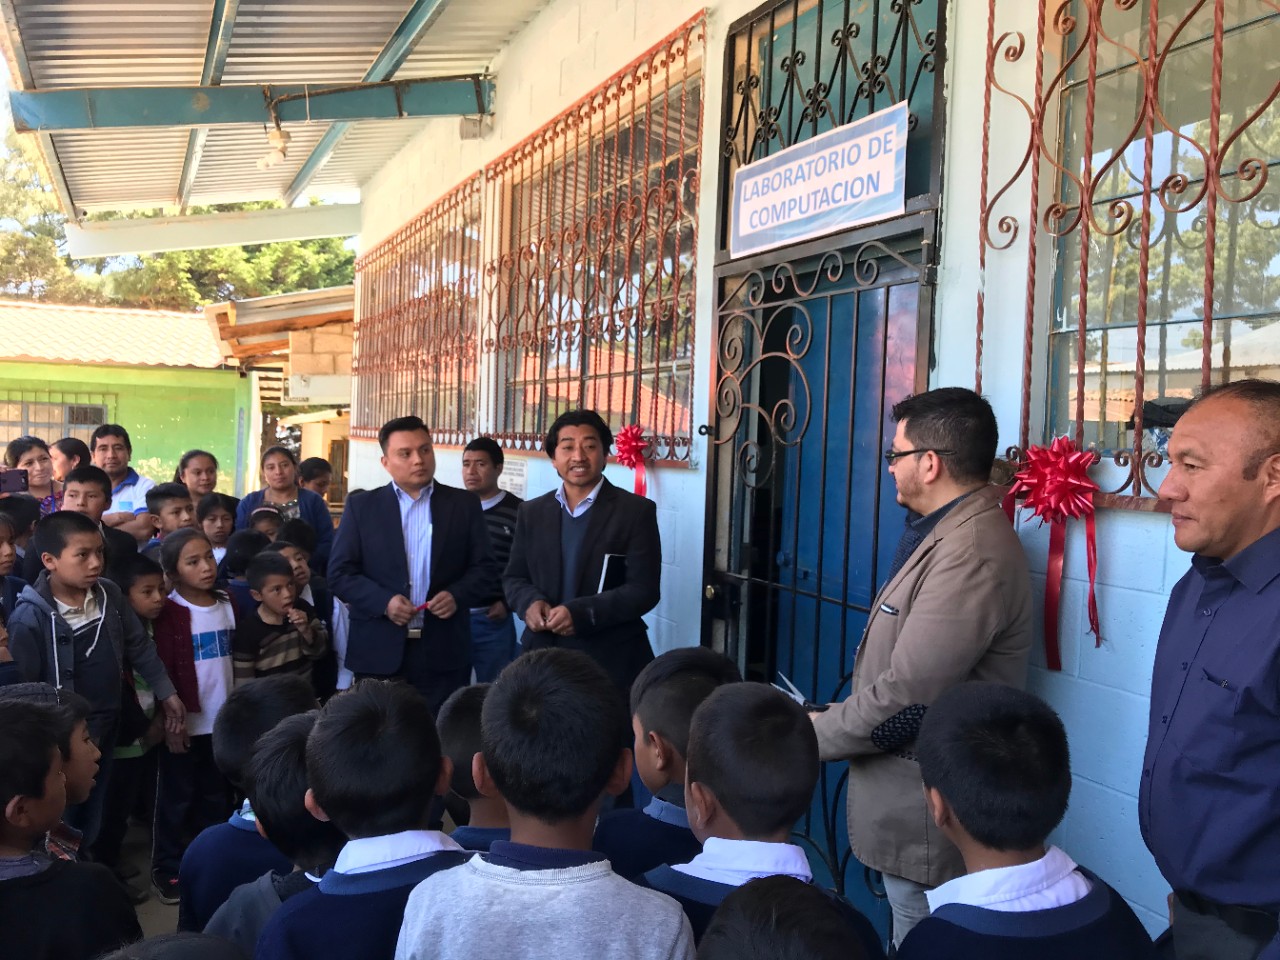 Dr. Singh was honored at an inauguration ceremony for the computer lab at the Santa Maria Chiquimula School in Totonicapan, Guatemala. 